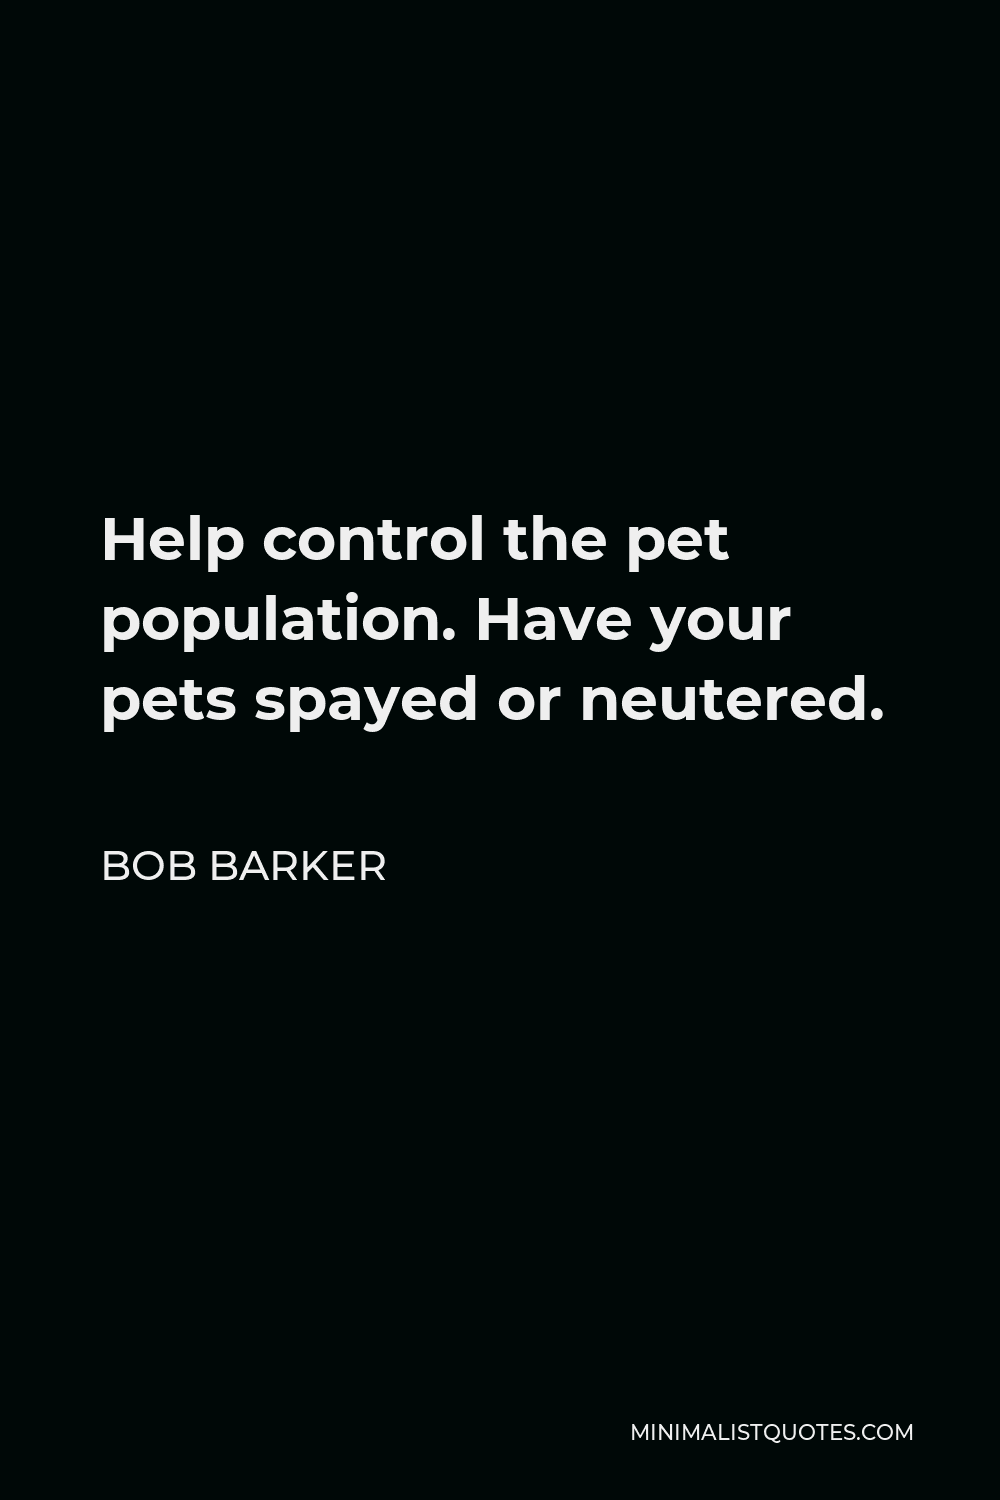 Bob Barker Quote - Help control the pet population. Have your pets spayed or neutered.